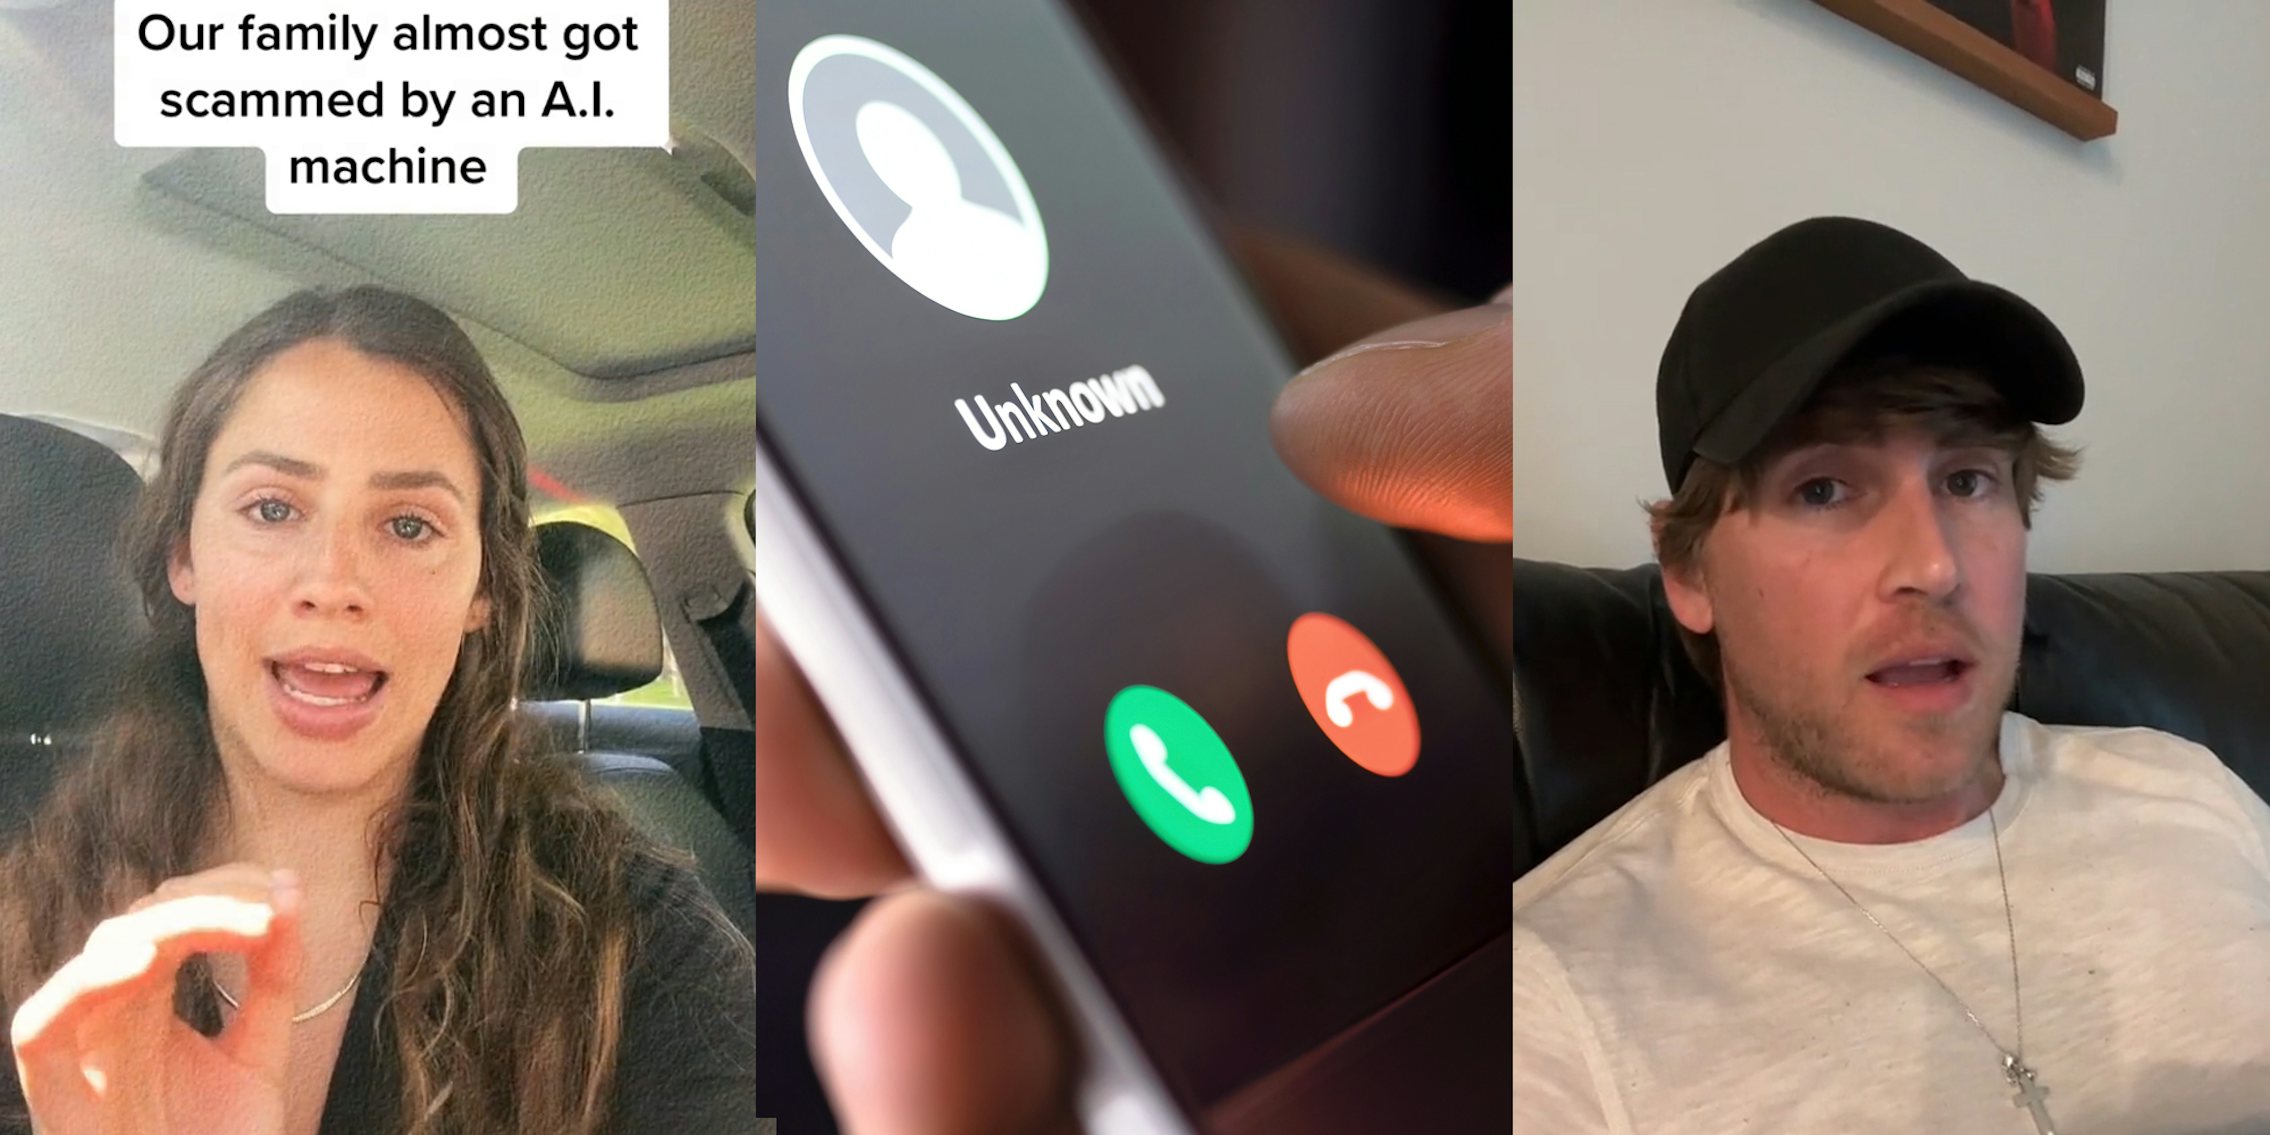 person speaking in car with caption 'Our family almost got scammed by an A.I. machine' (l) hand holding phone with unknown caller on screen (c) person speaking on couch (r)